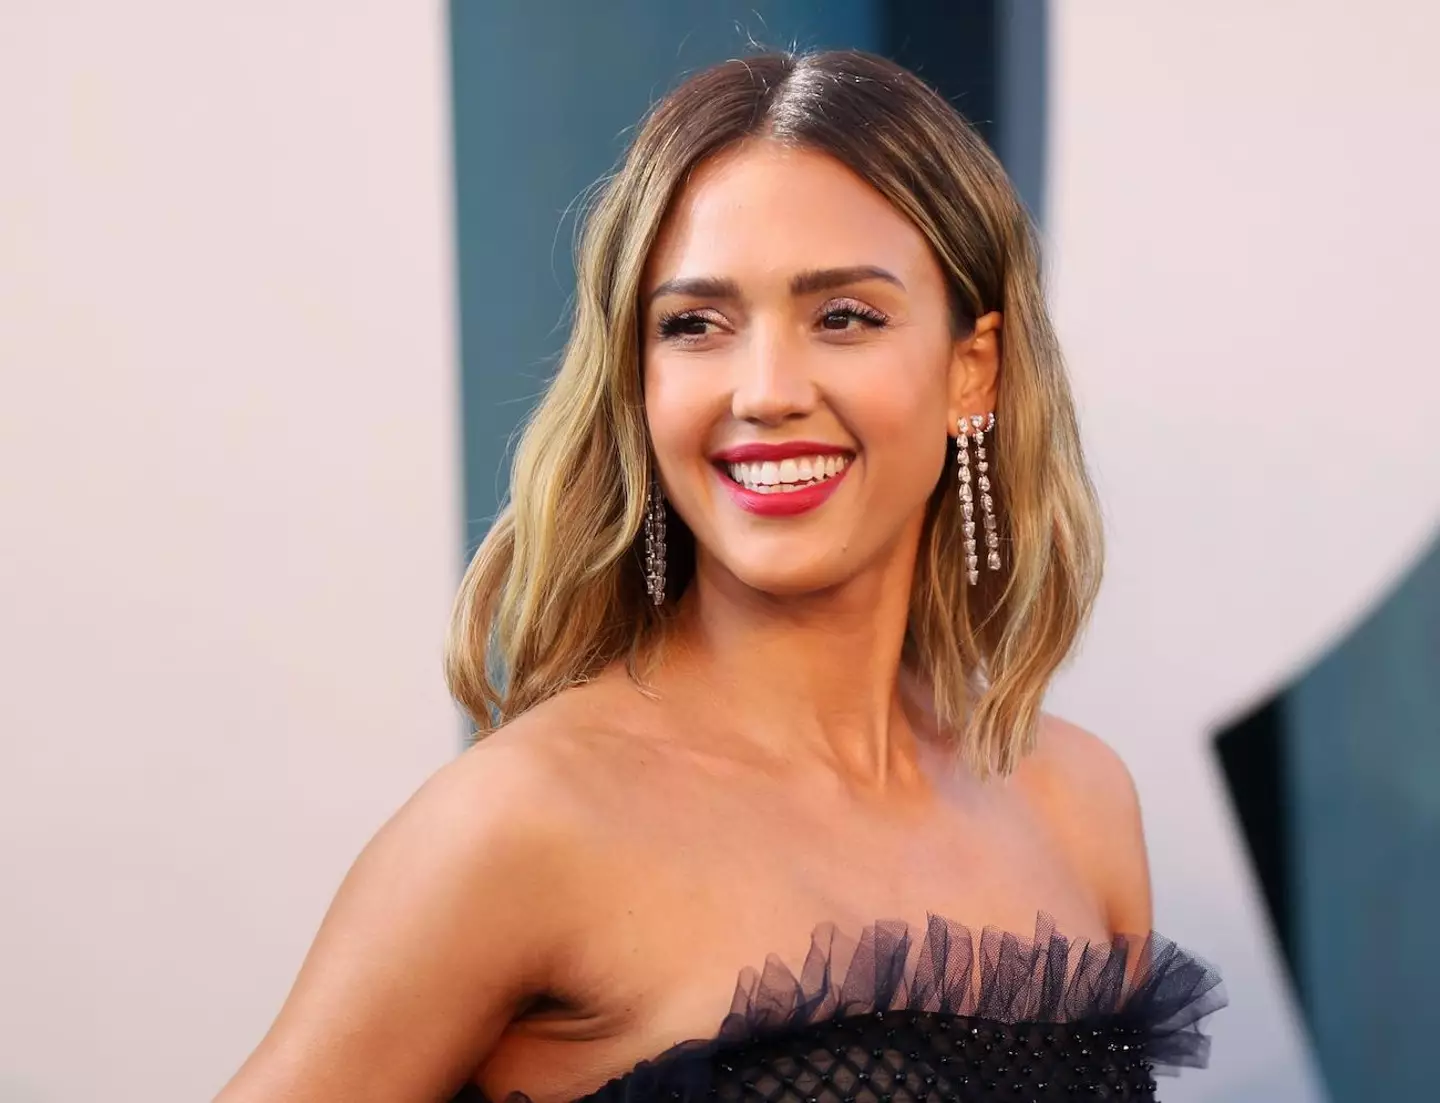 Fantastic Four actor Jessica Alba believes that younger people should have more representation of themselves on screen.